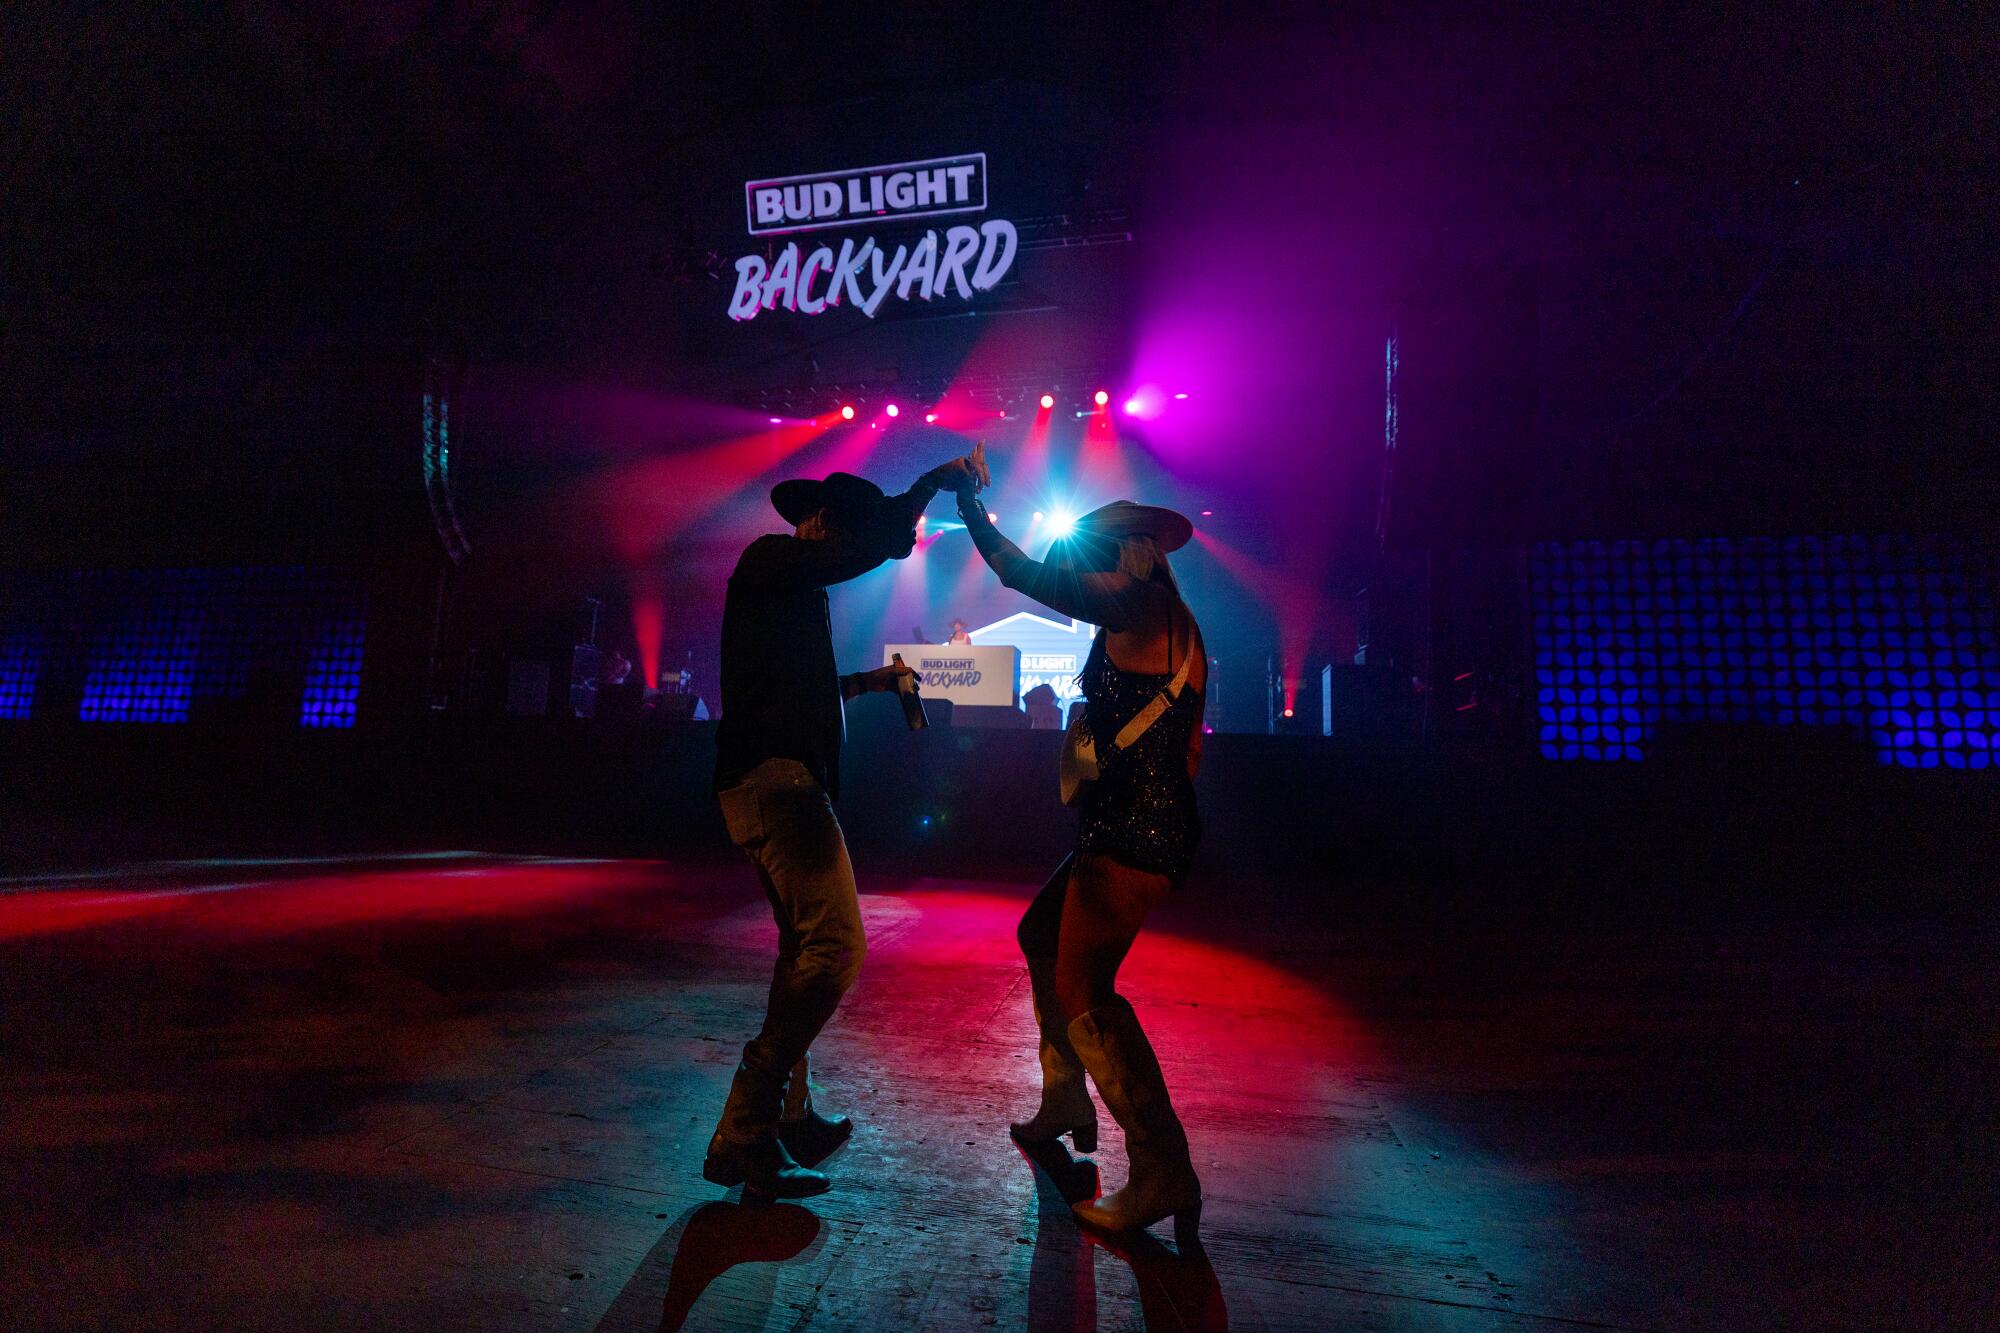 A couple dances in Bud Light Backyard on the final day of the Stagecoach Country Music Festival.